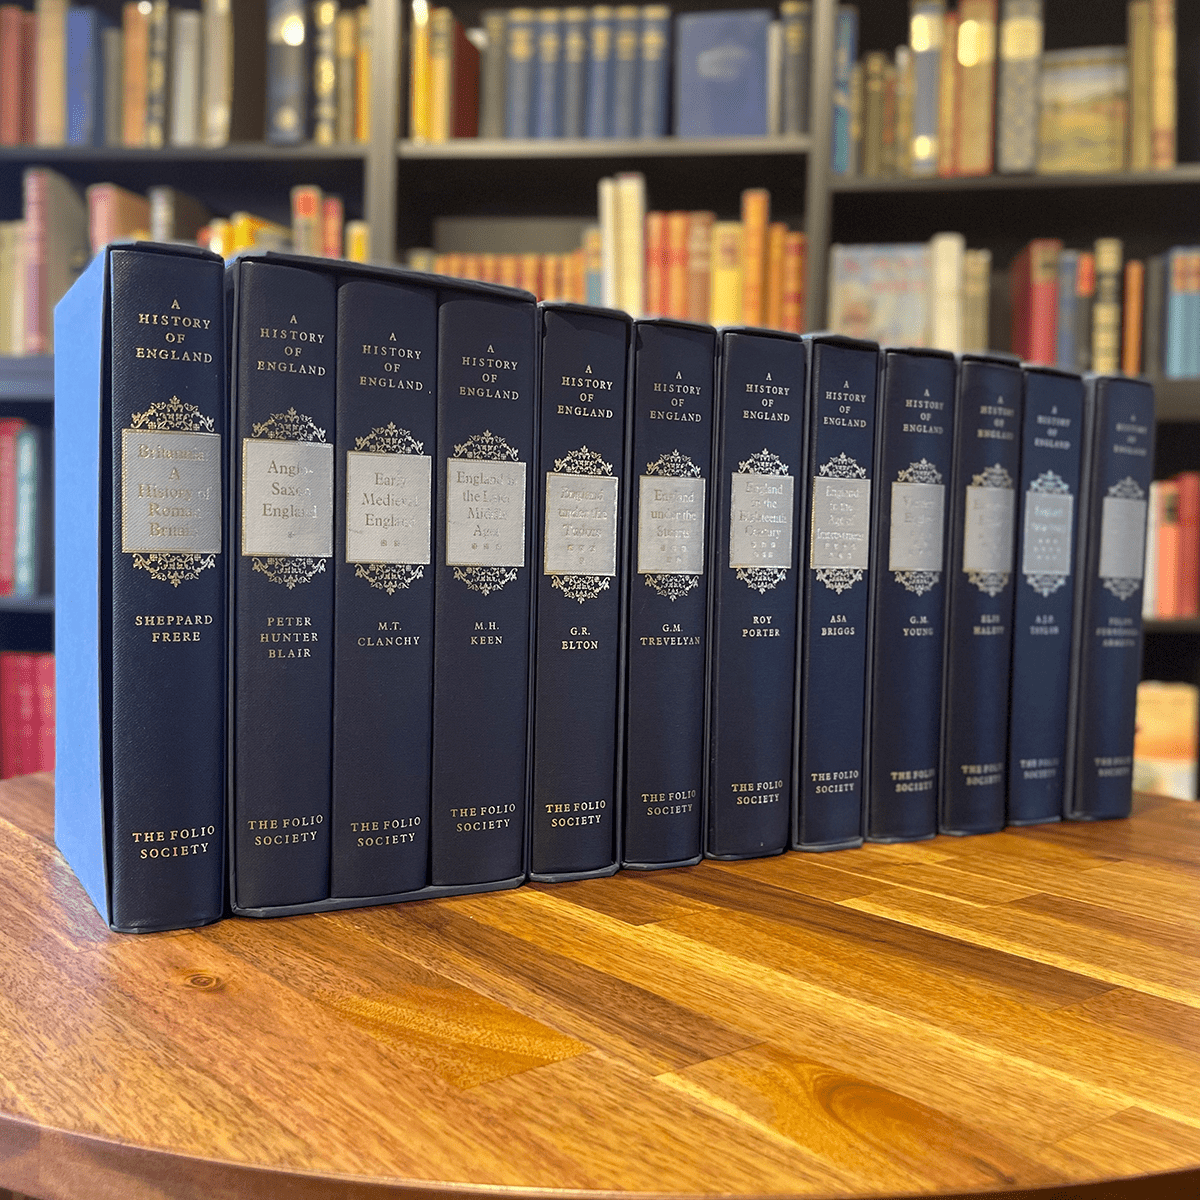 A History of England in 12 volumes